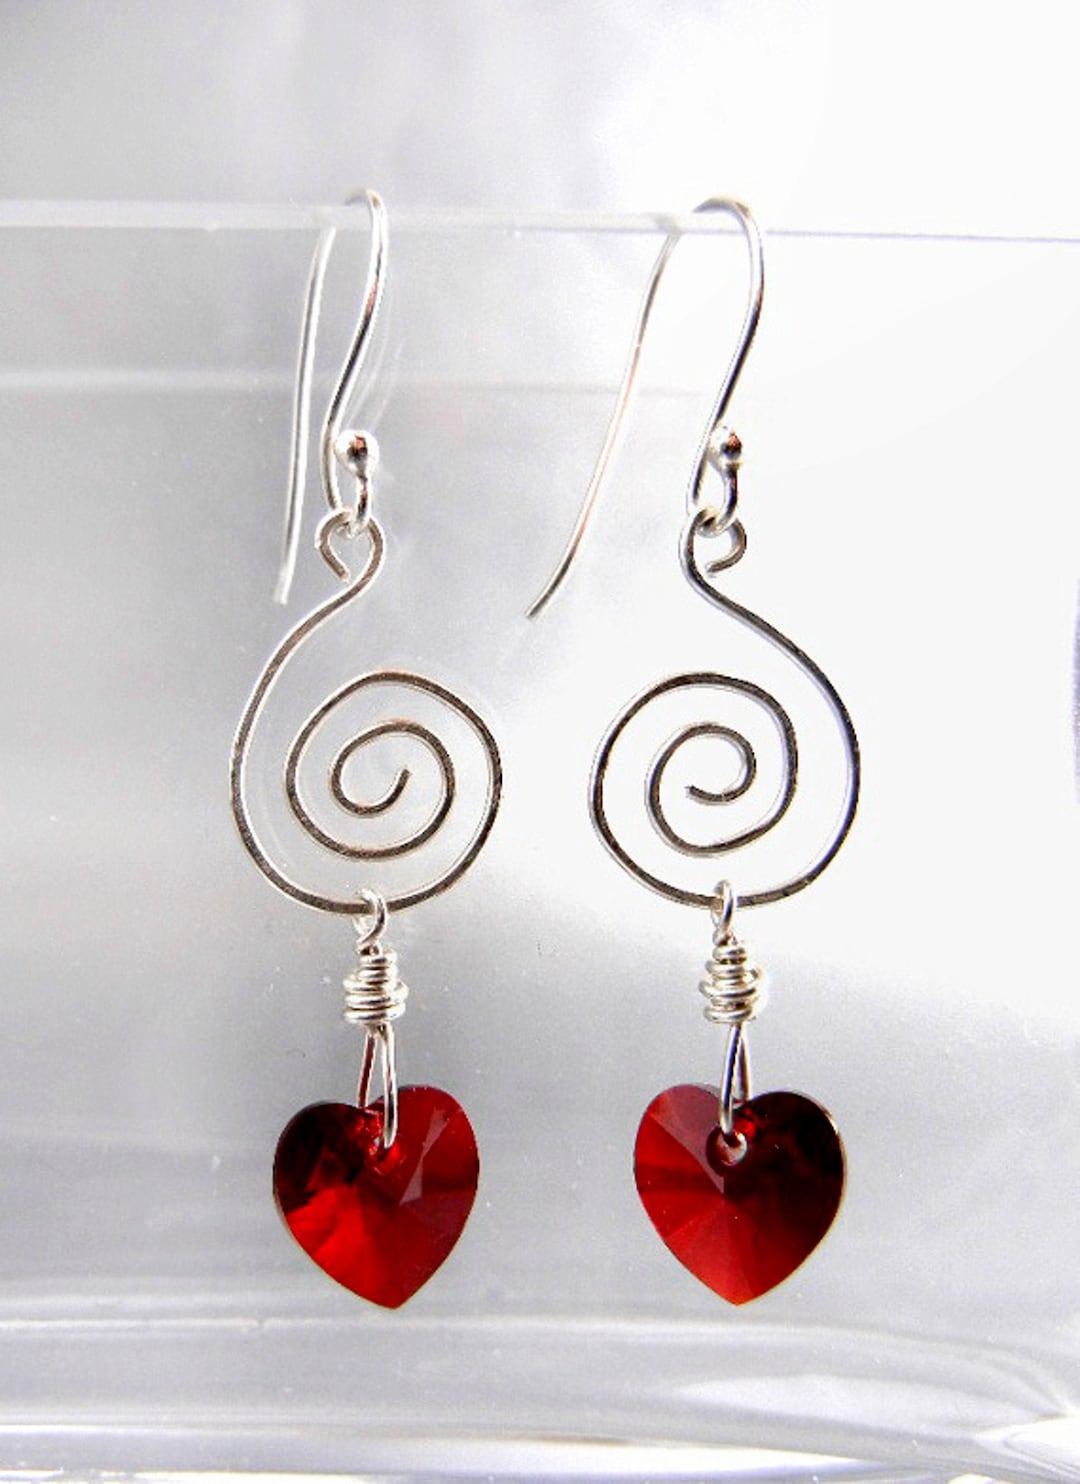 Red Heart Earrings of Swarovski Crystals on Sterling Silver - Etsy